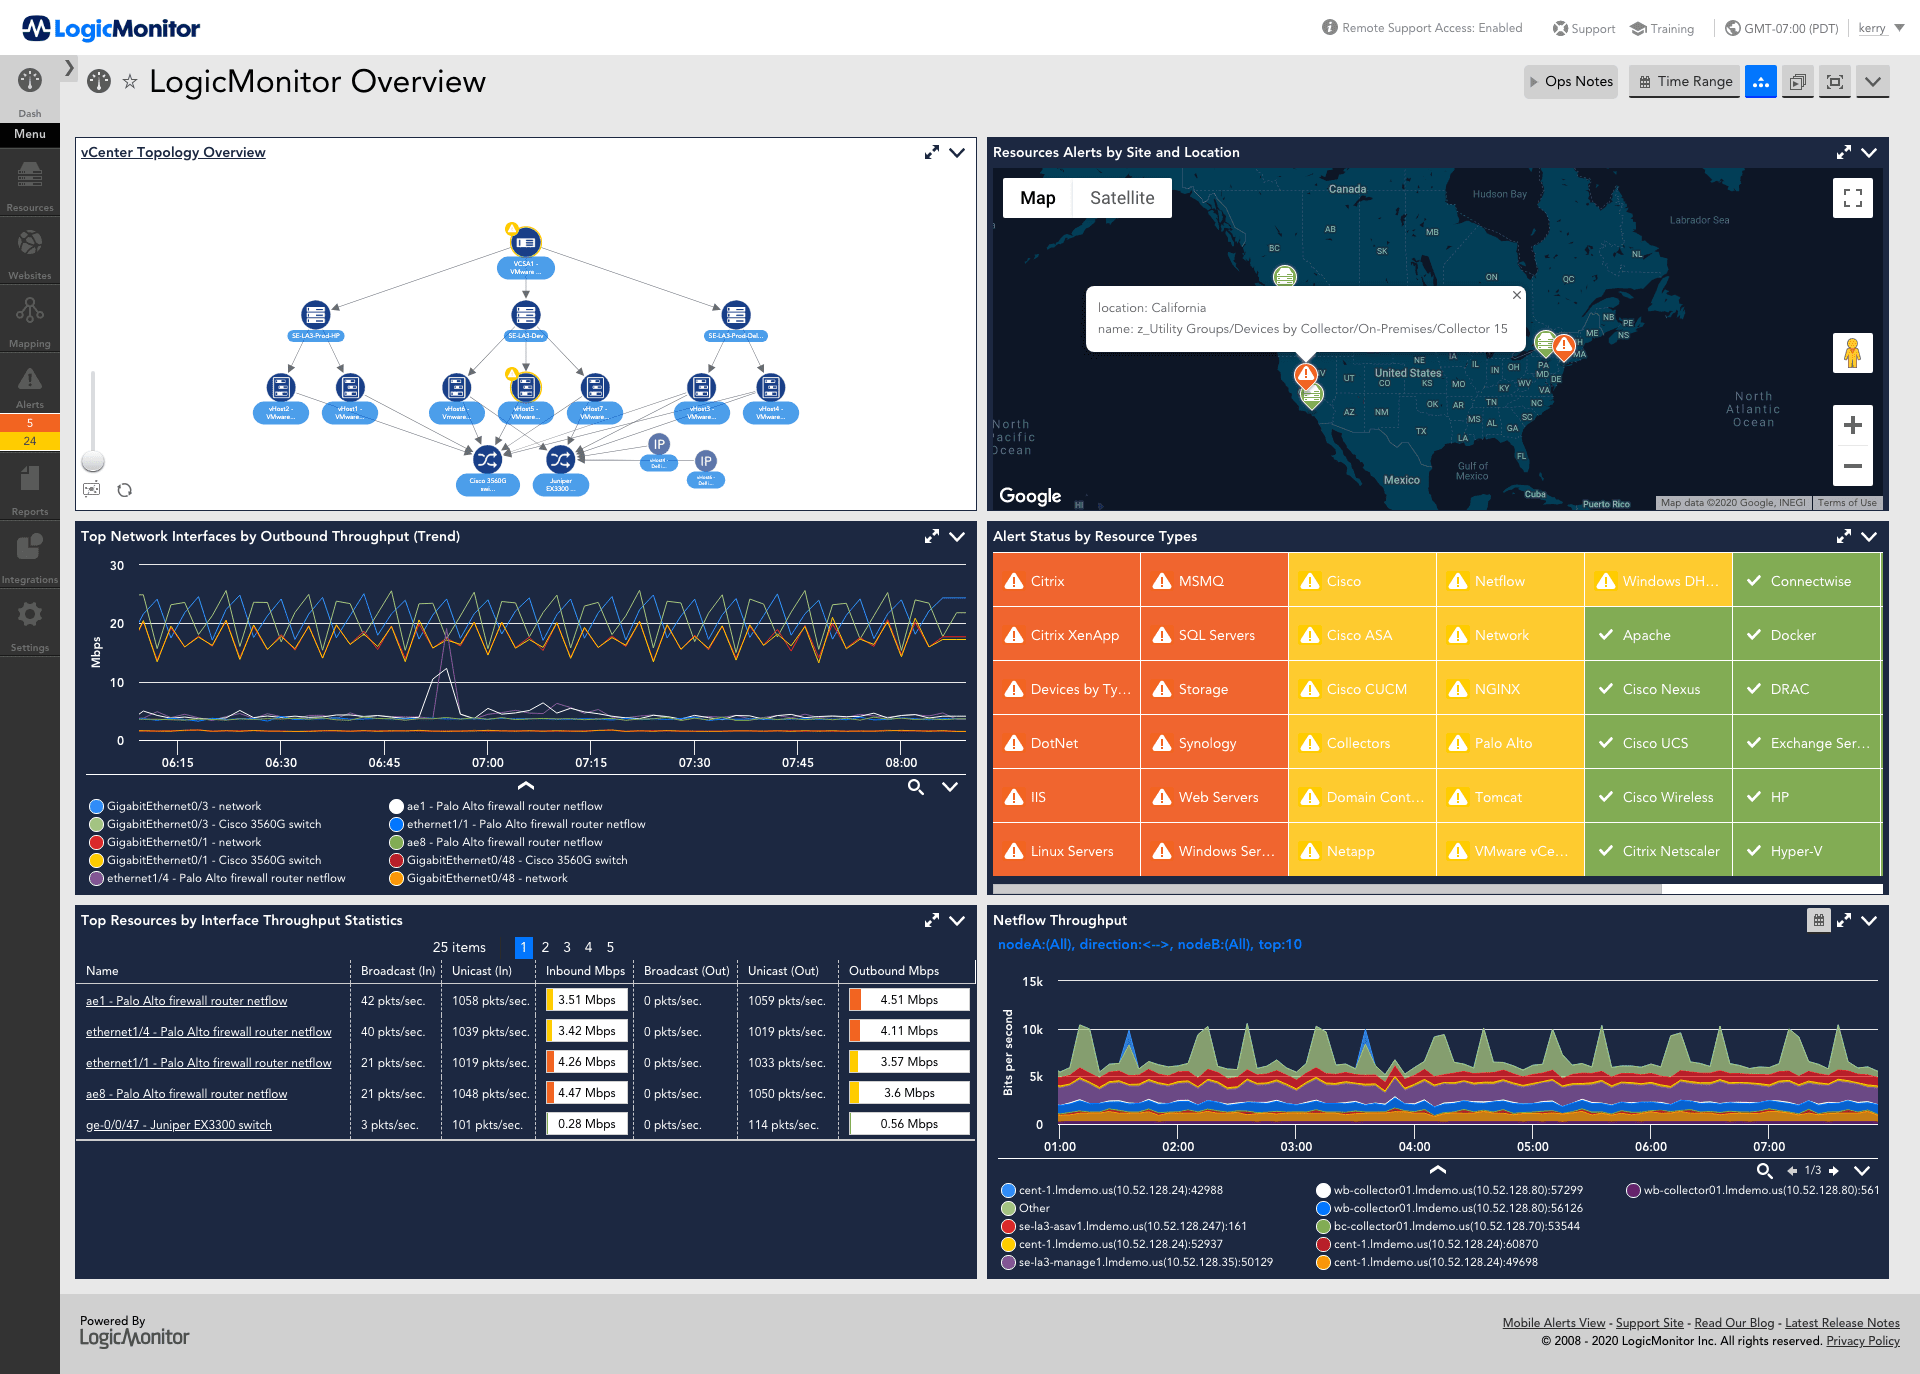 LogicMonitor Overview Dashboard with Topology map, resources alerts by site and location, top network interfaces by outbound throughput, Alert status bu resource type, netflow, etc.